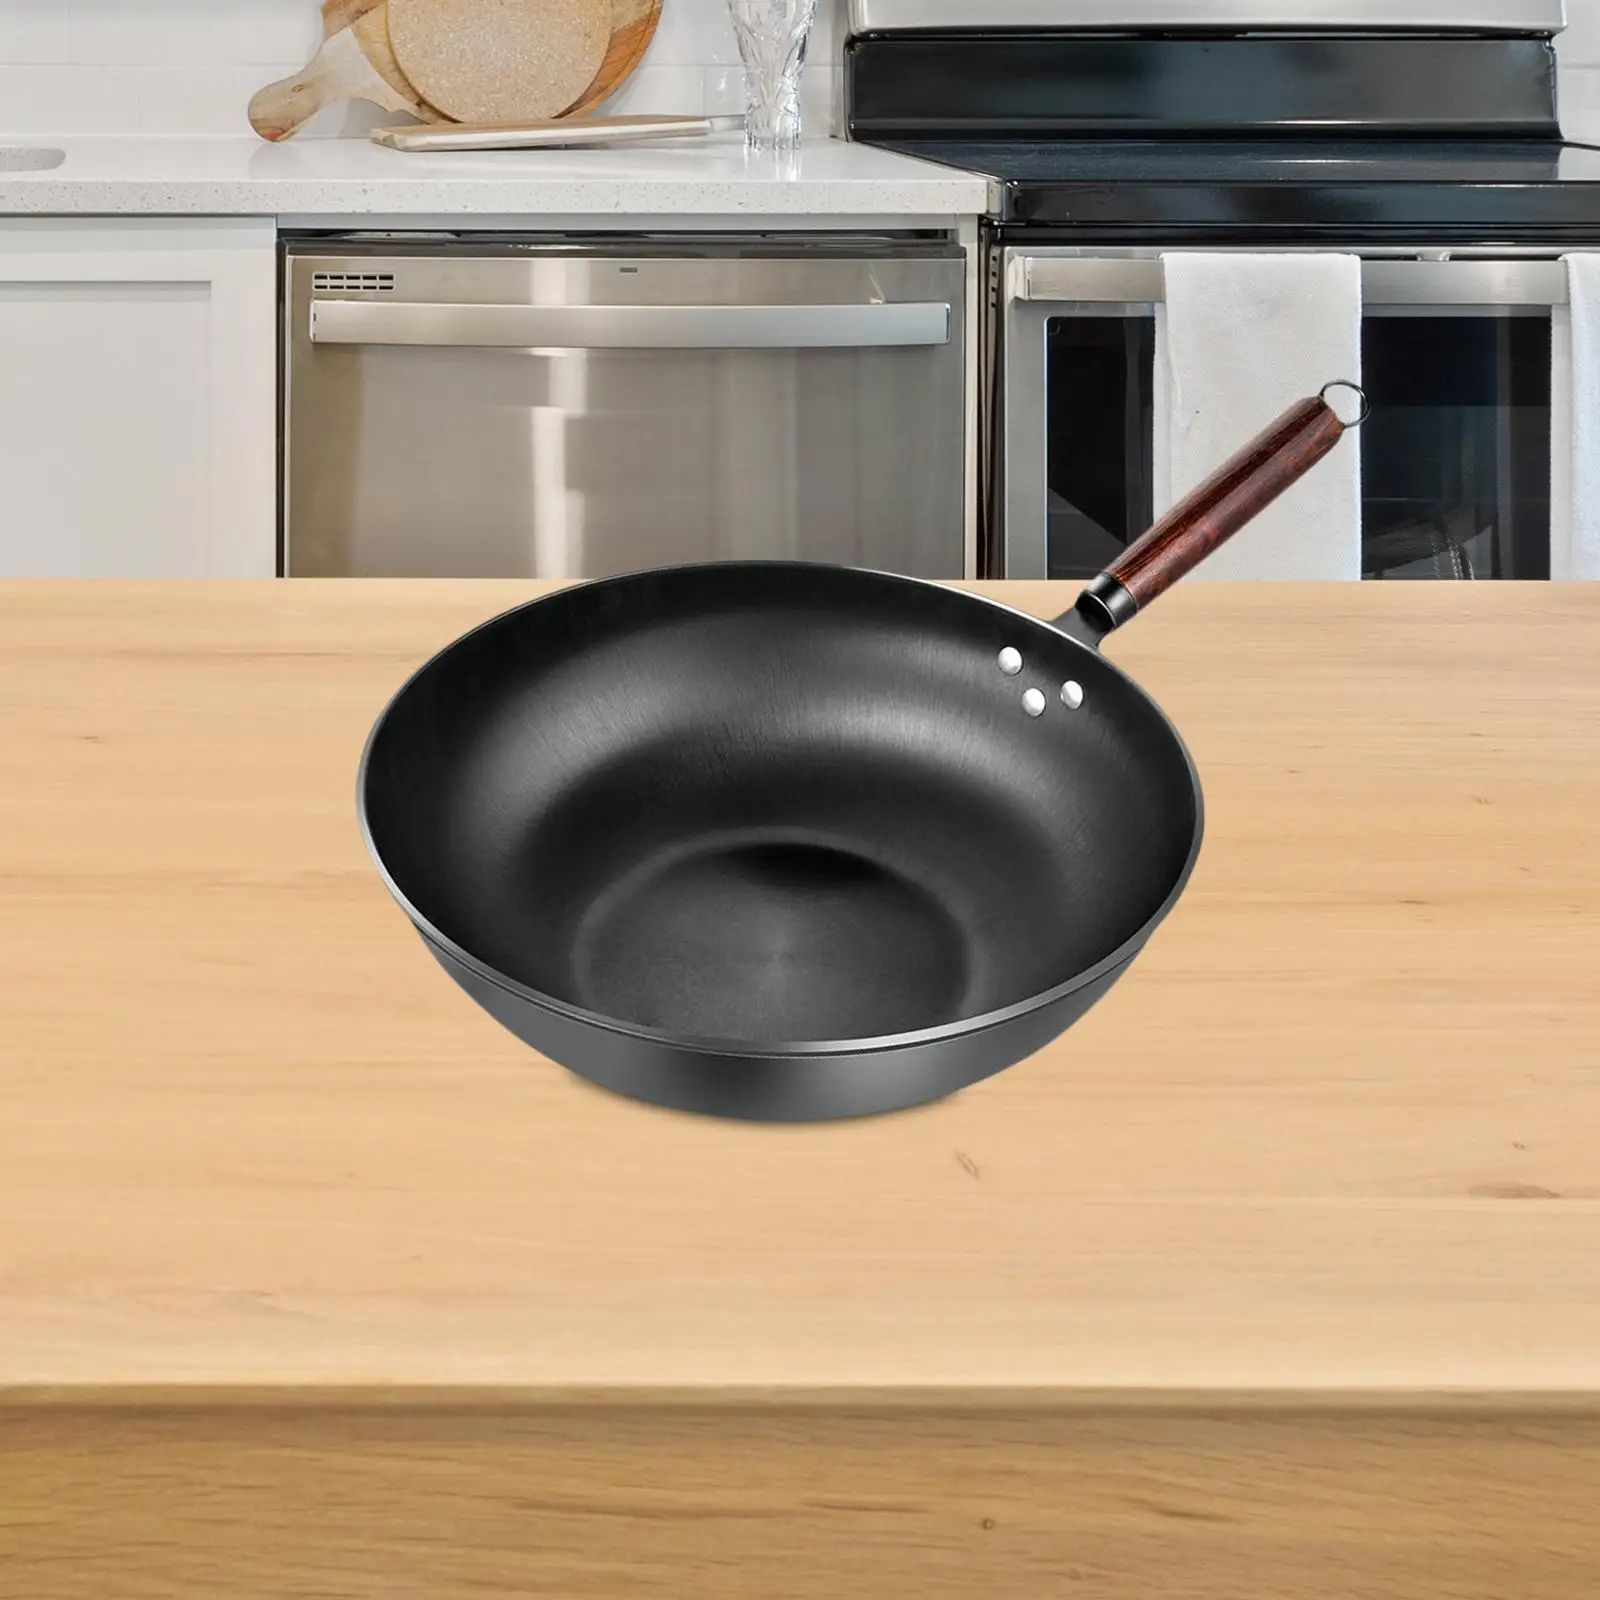 Nonstick Wok Uncoated Durable Induction Cooker Wood Handle Universal Wok Pan Chinese Wok Stir Fry Pan for Cooking Sautee Boiling